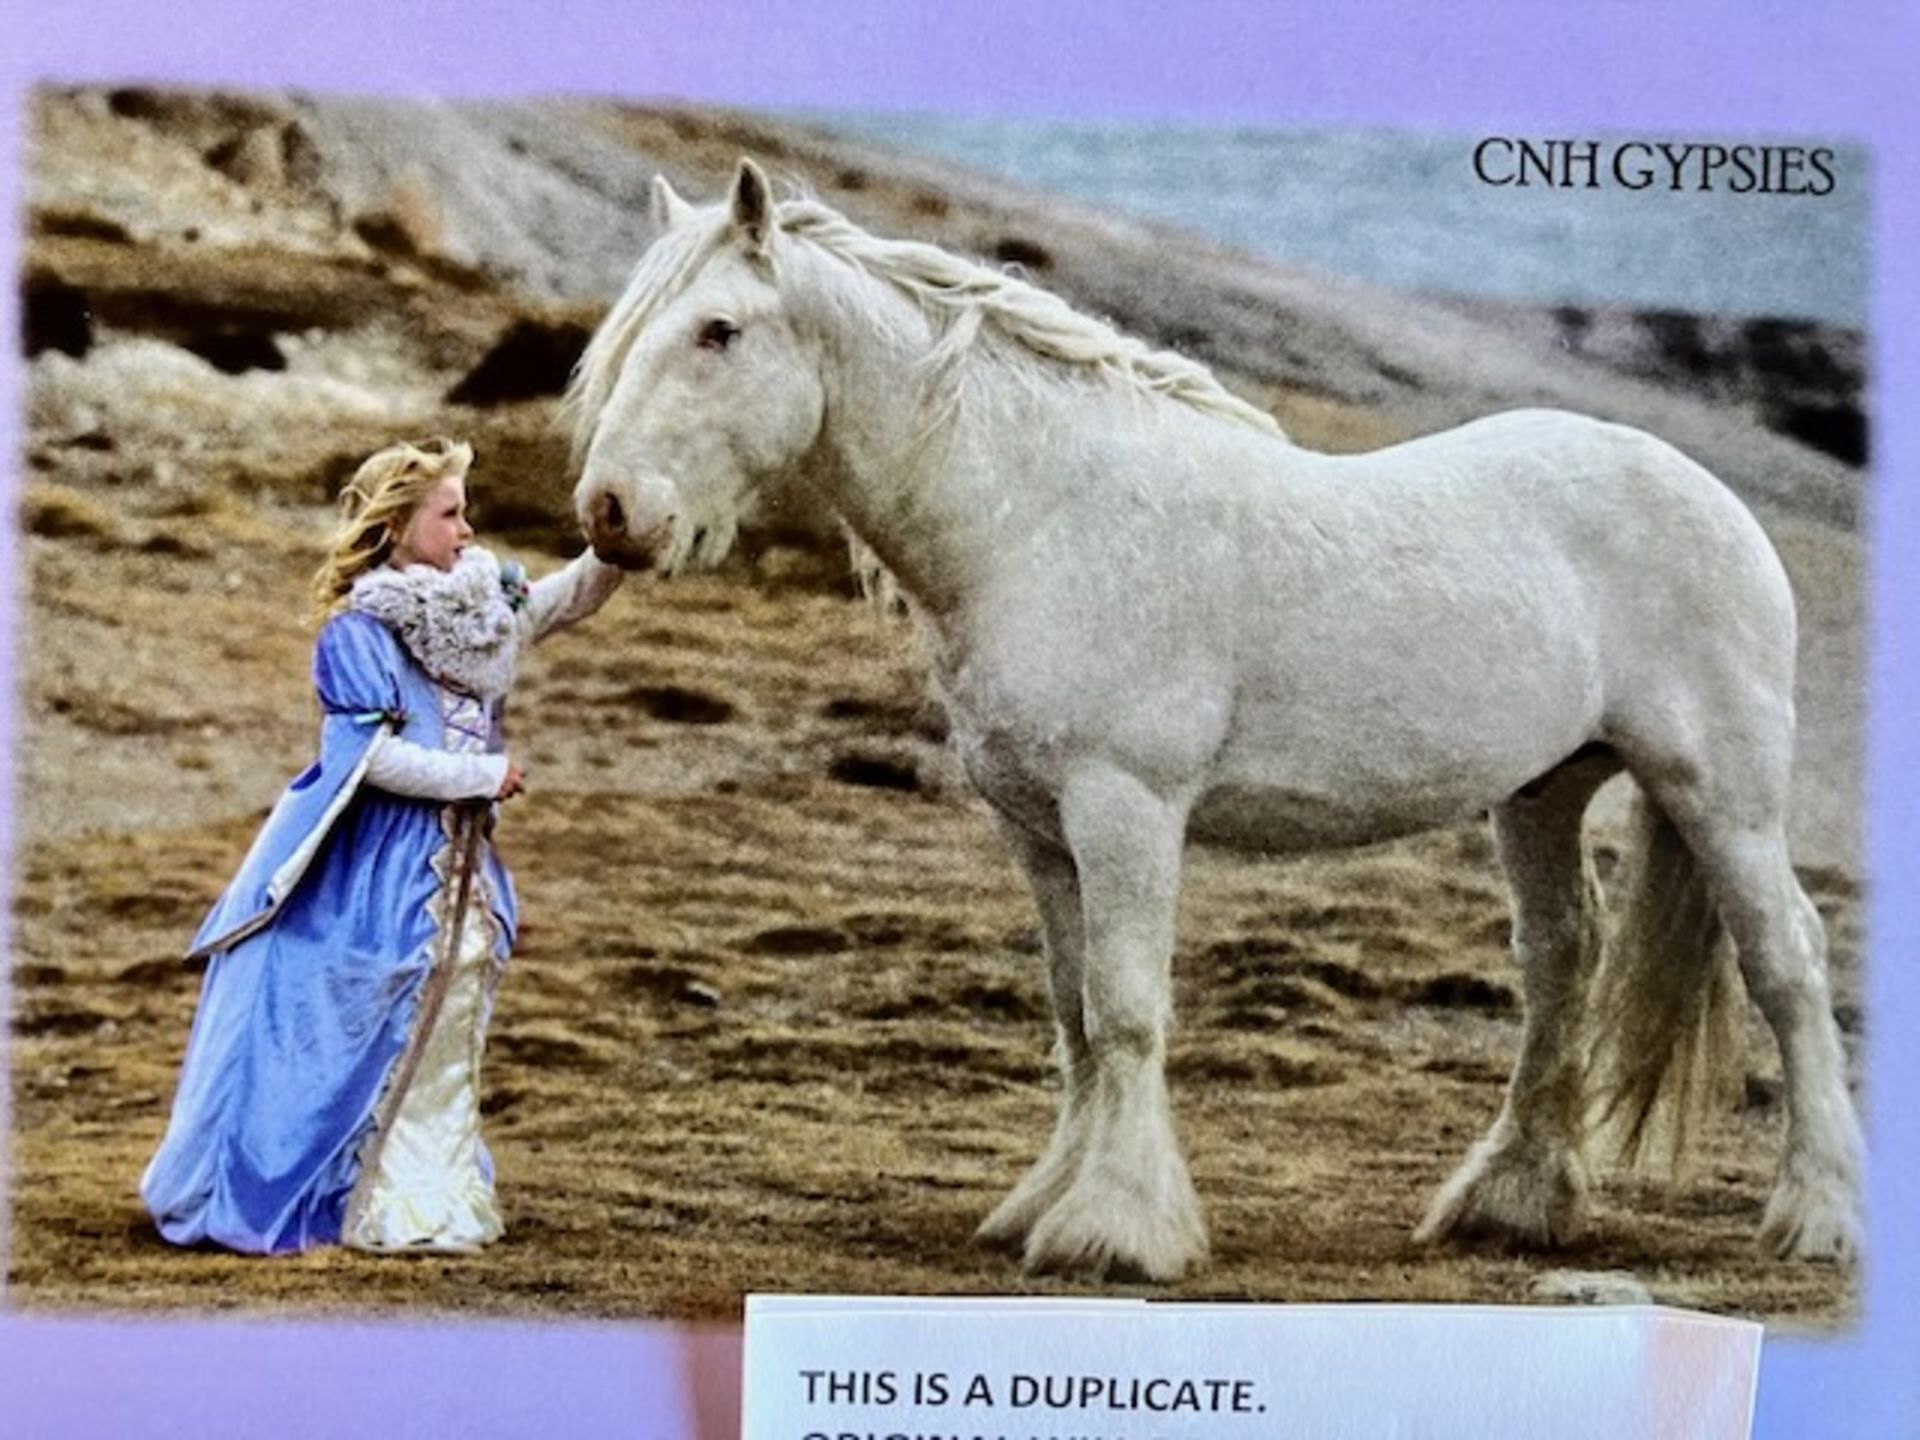 CNH GIFT CERTIFICATE FOR 1 GYPSY STALLION SERVICE (LIVE COVER ) - Image 3 of 4